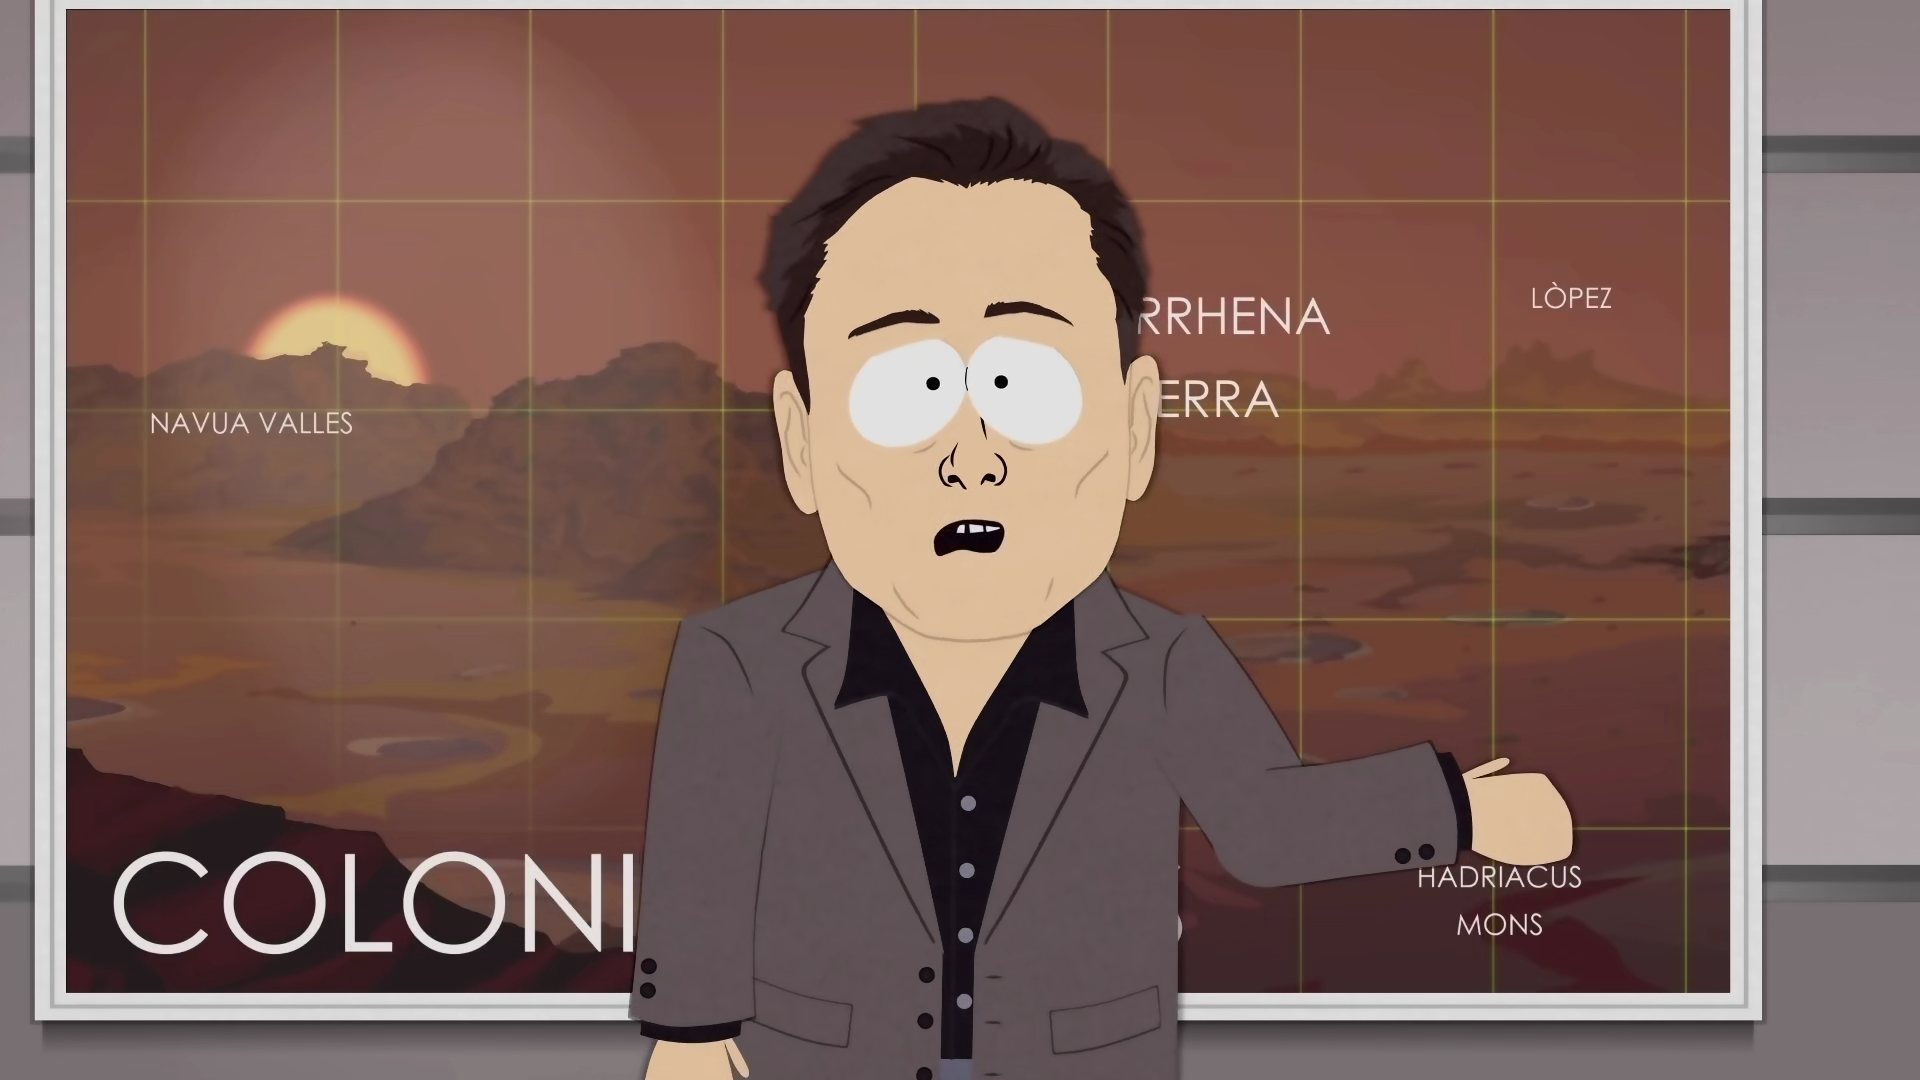 Elon Musk speaks with Eric Cartman (Trey Parker) about SpaceX's plans to colonize Mars via South Park Season 20 Episode 10 "The End of Serialization as We Know It" (2016), Paramount via Blu-ray